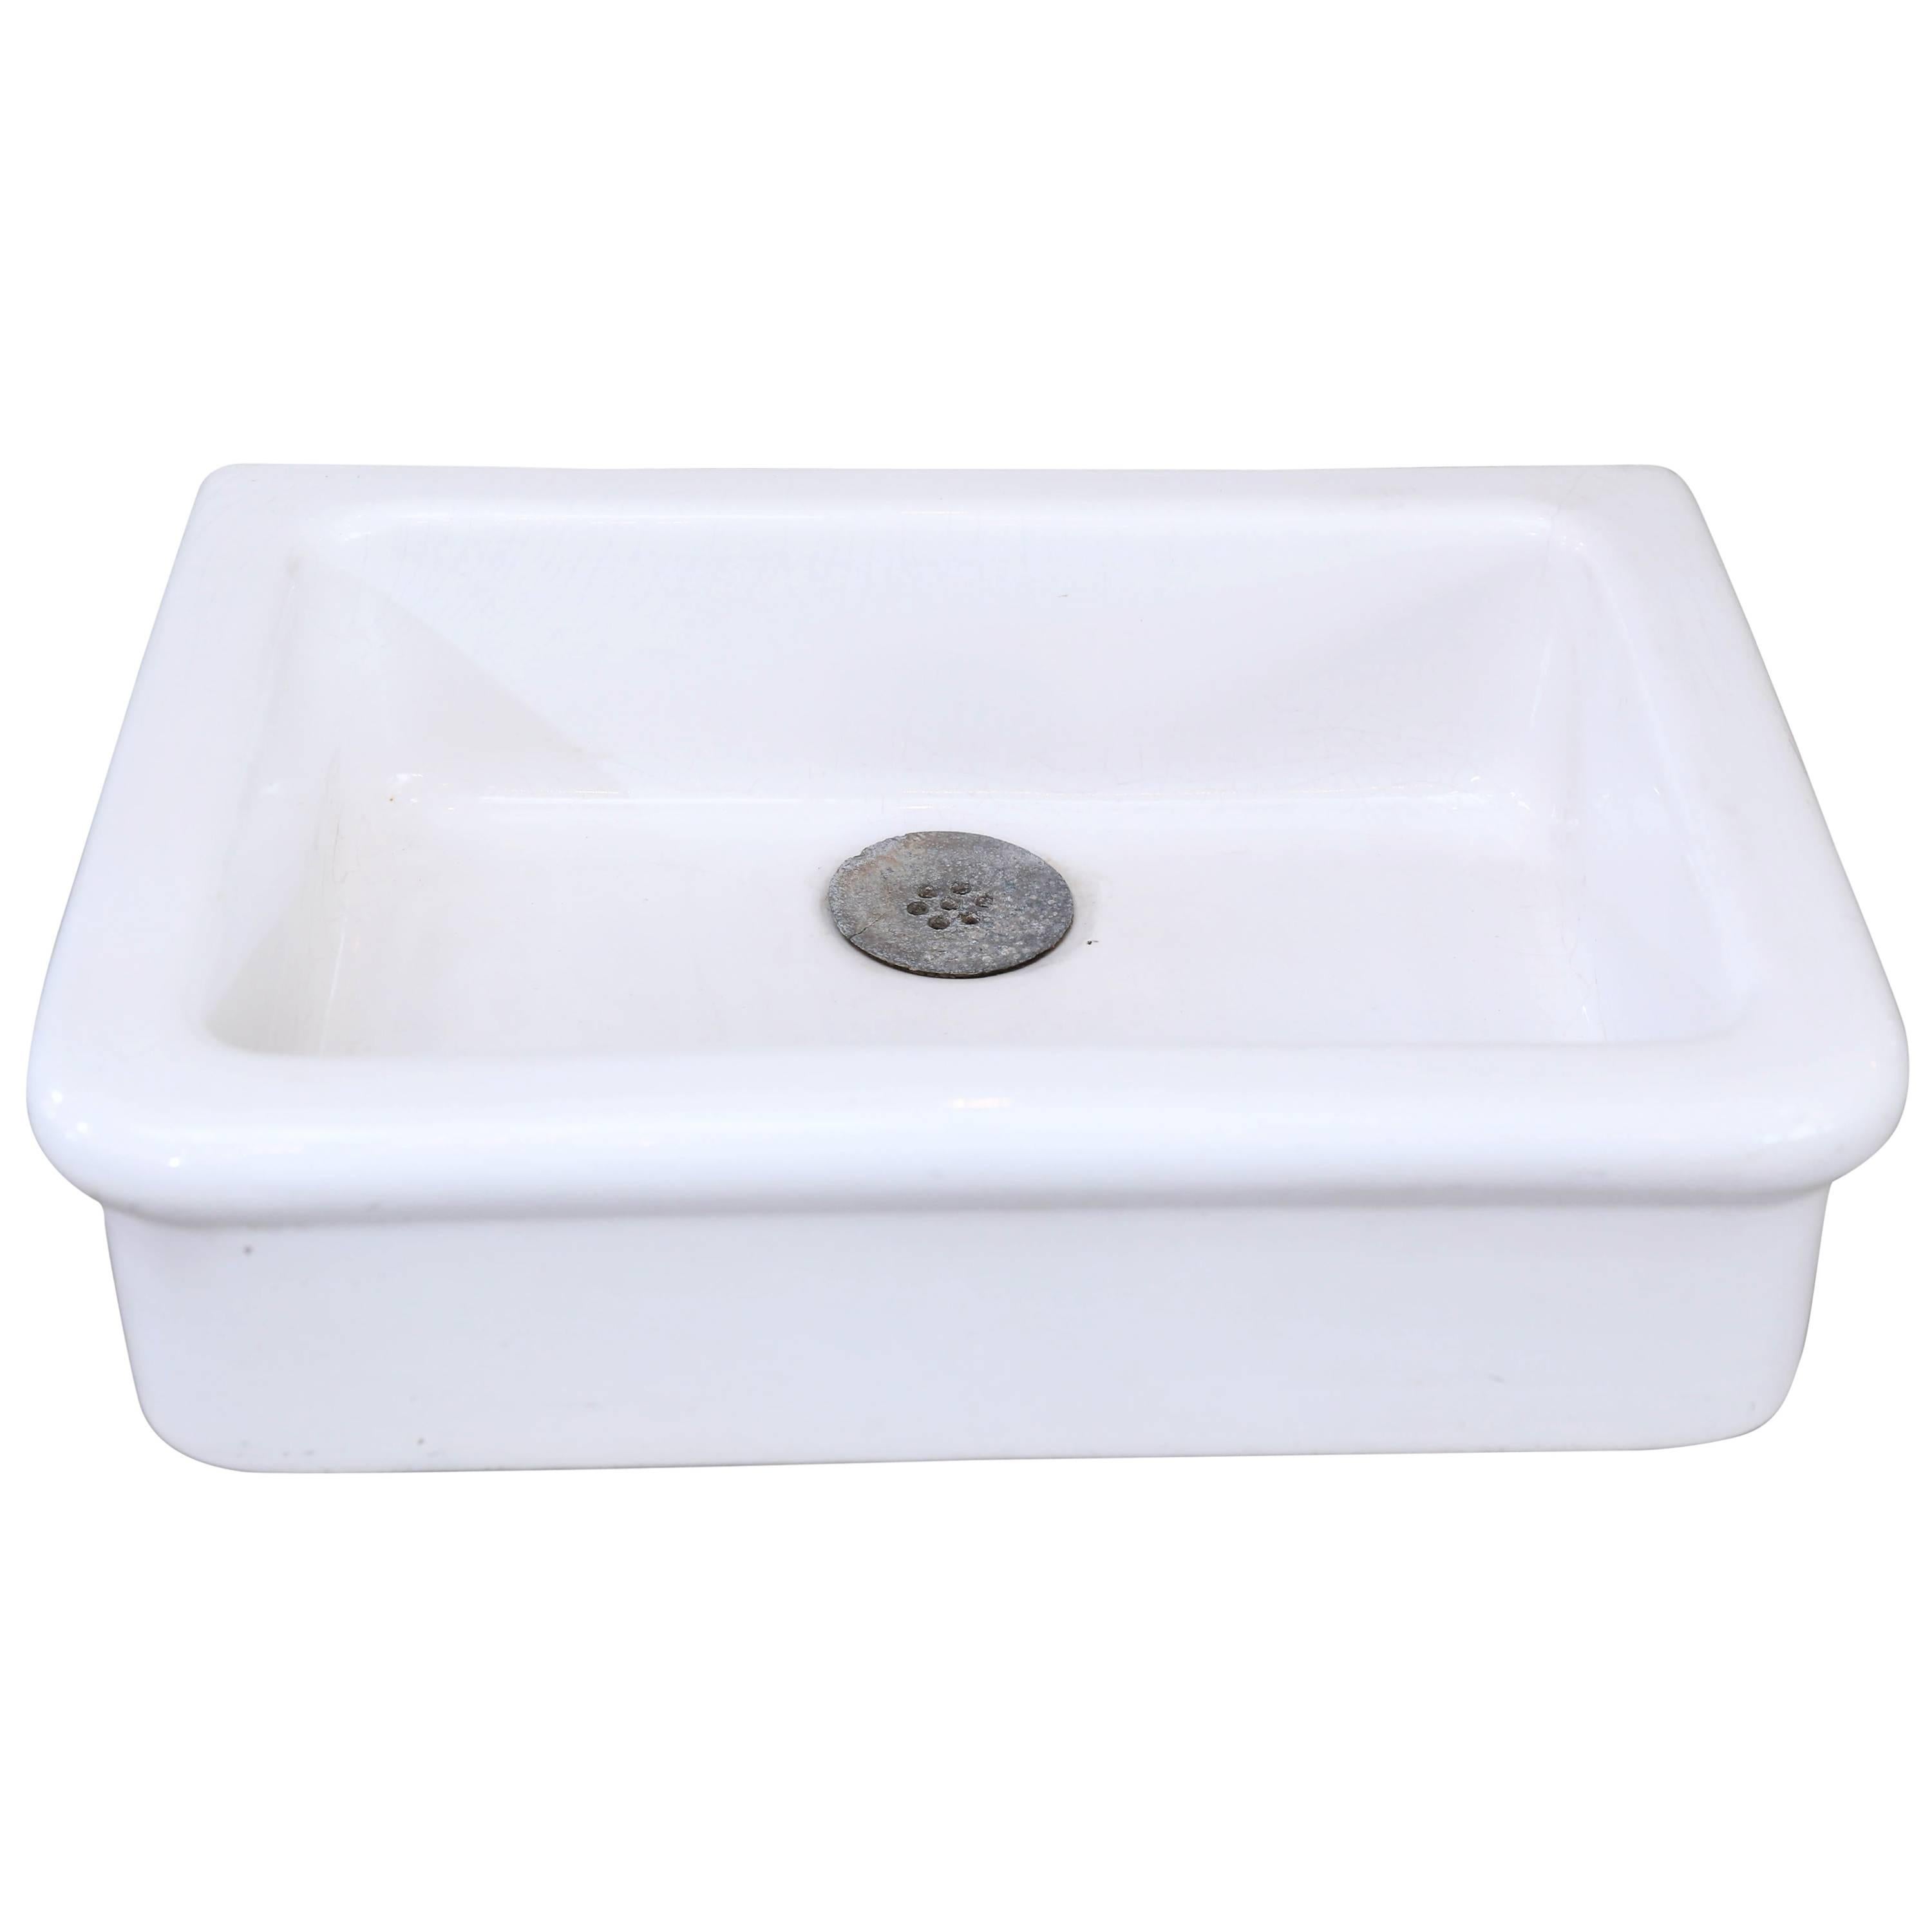 White Porcelain Farm Sink with Drain Cover from France, circa 1900